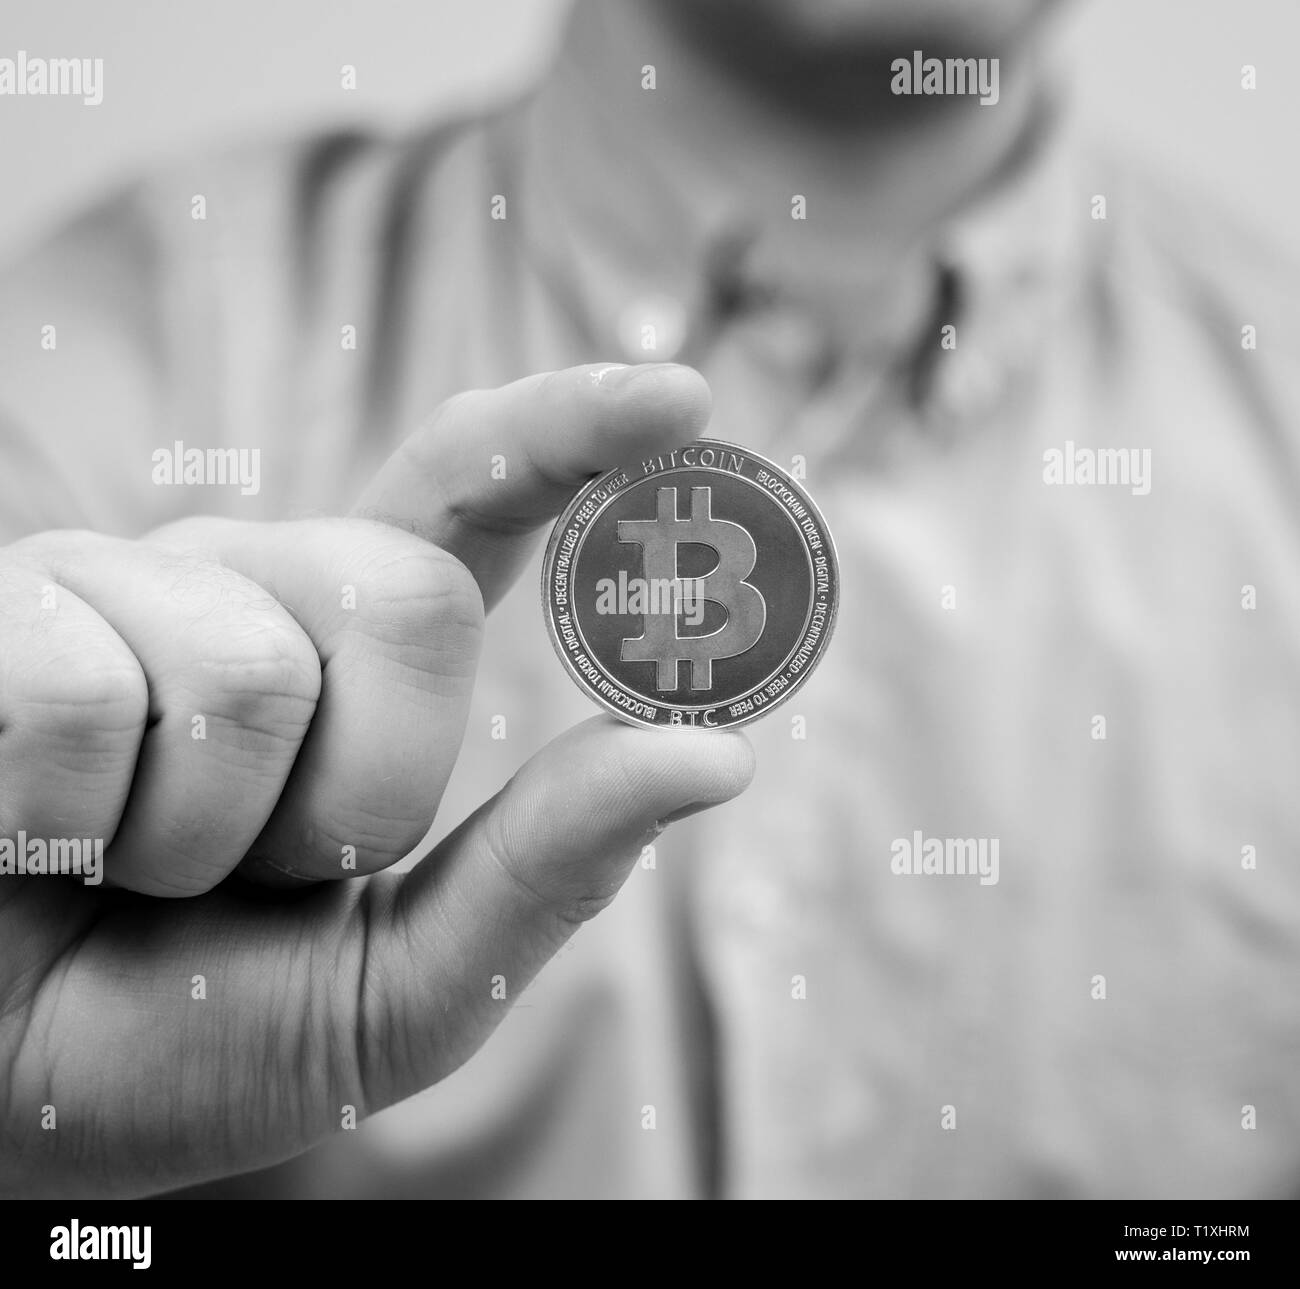 Man holding physical bitcoin. Symbol of virtual currency. Stock Photo